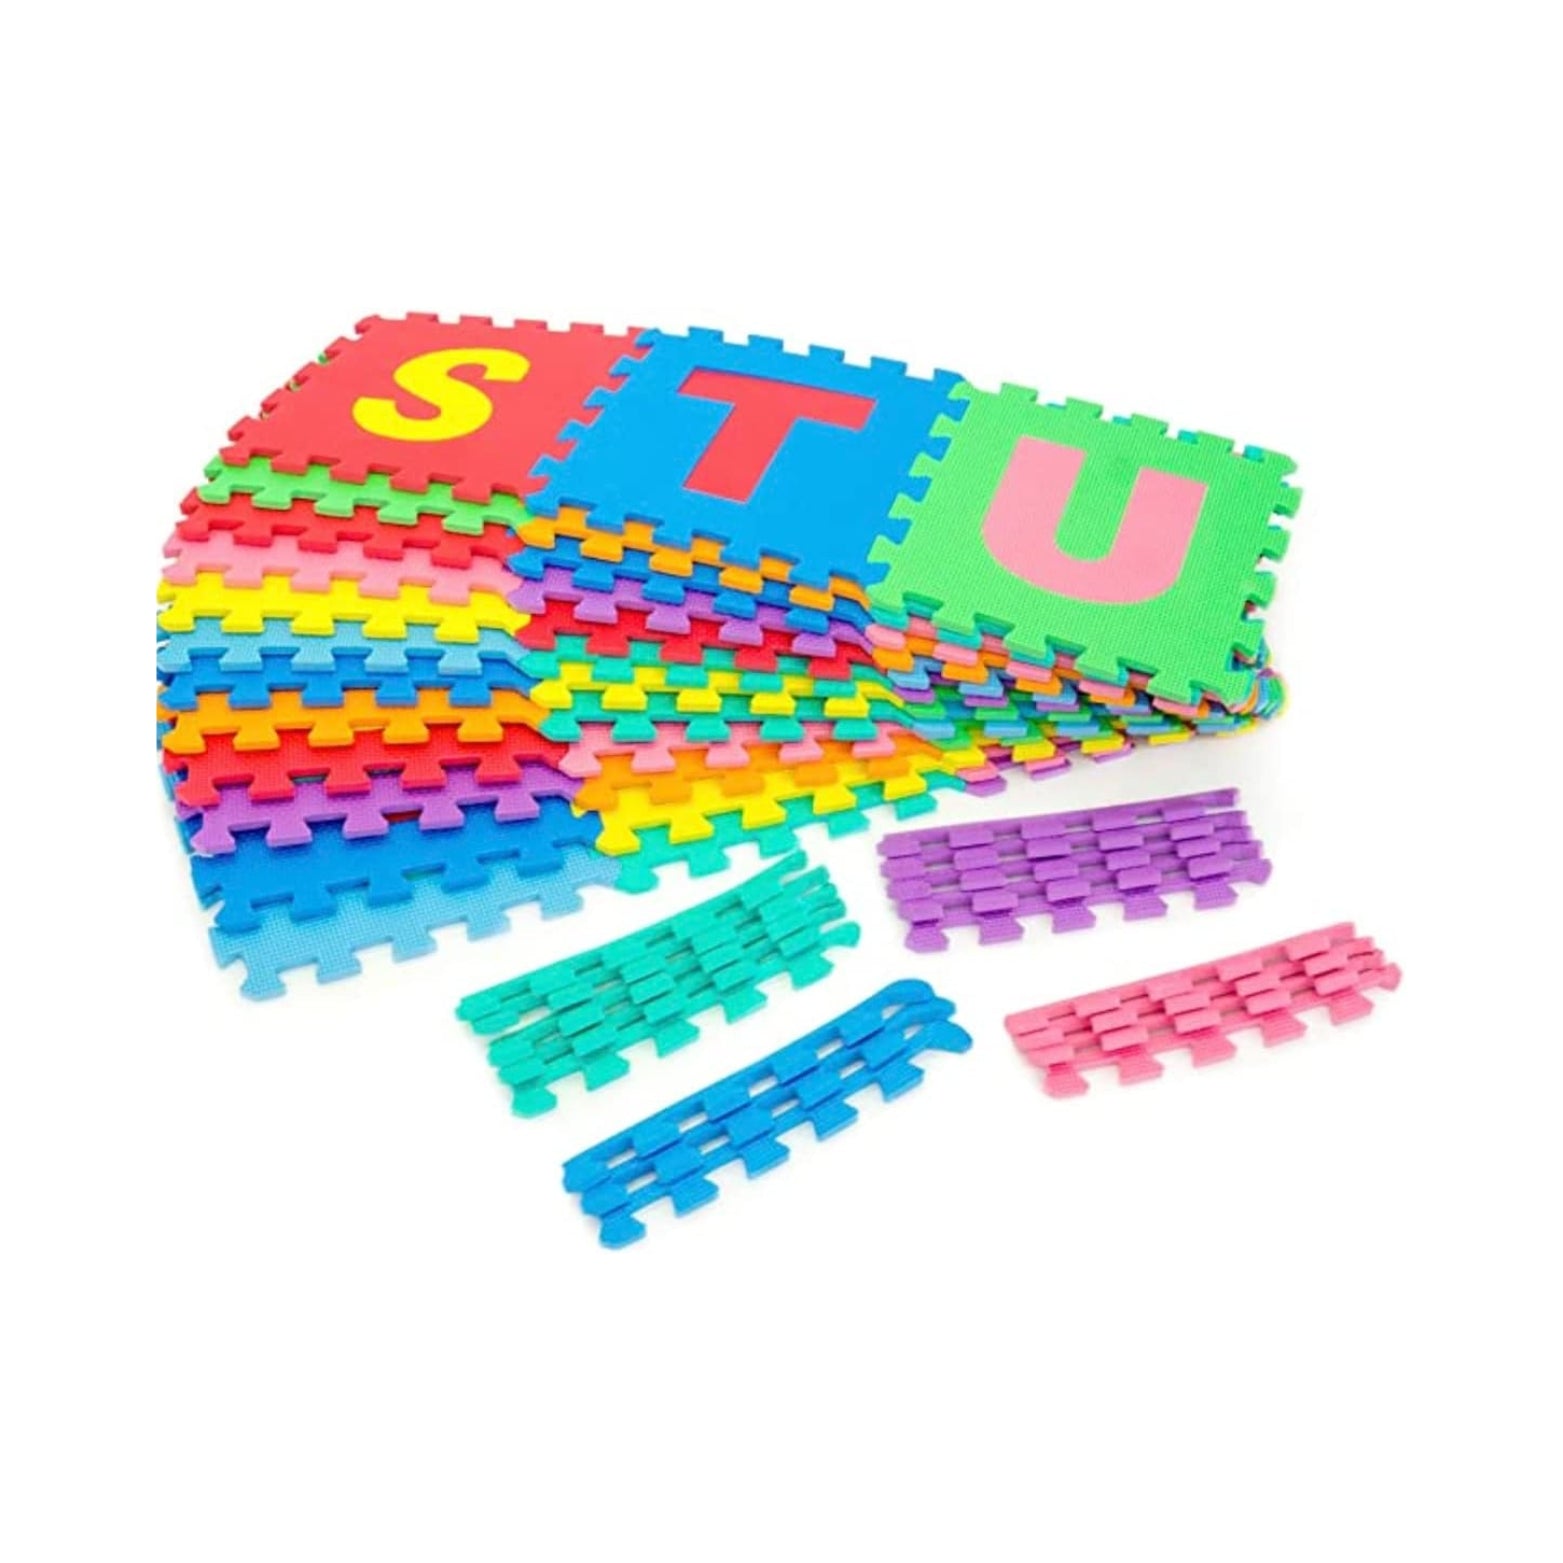 60-Piece Alphabet & Numbers Play Mat - Educational Foam Puzzle for Toddlers & Kids, 36 SqFt - XL